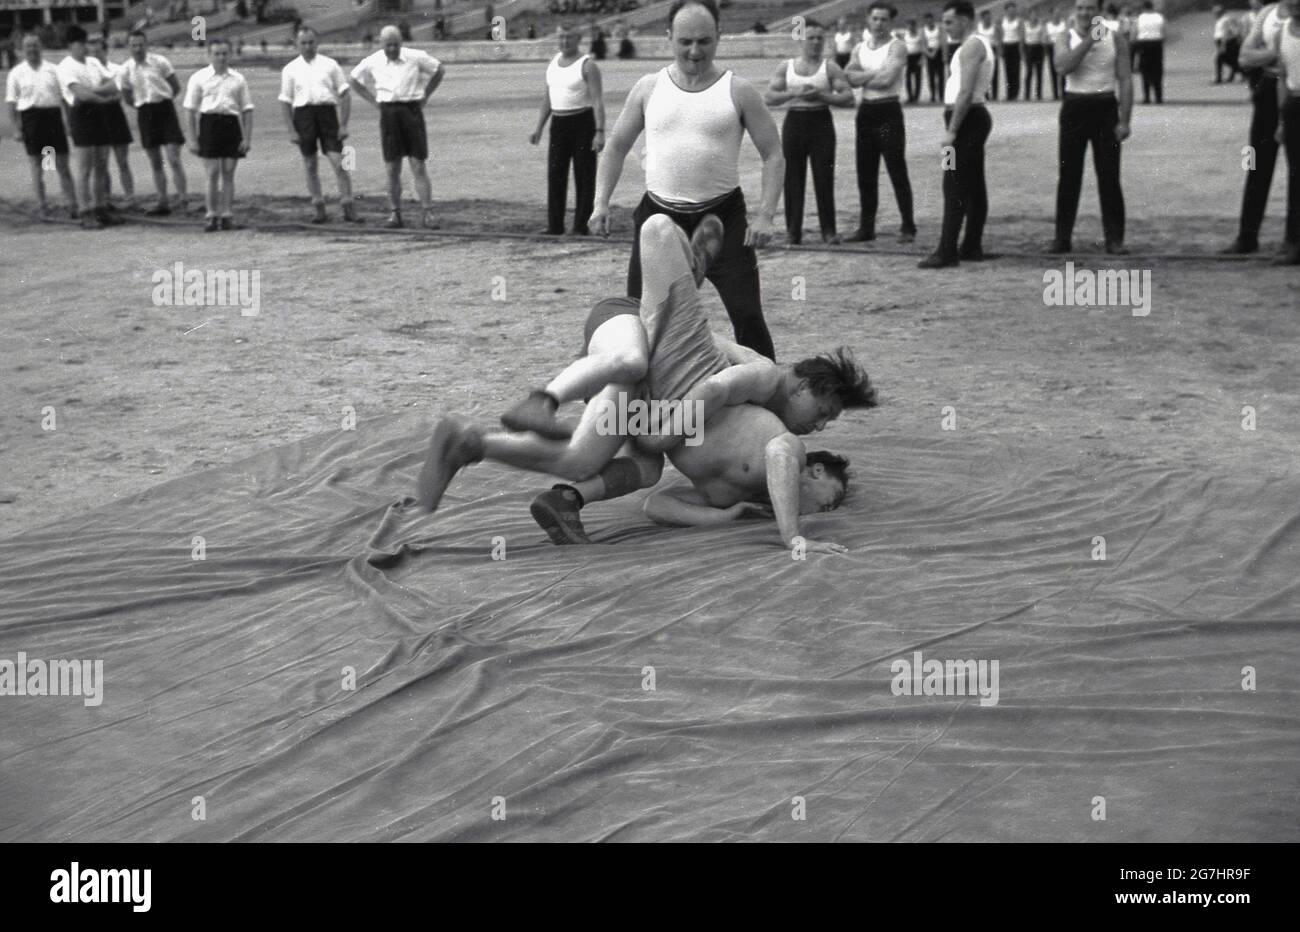 1930s, historical, inside the Strahov Stadium, Prague, Czecholsovakia, two wrestlers competiting on a large rubber mat or sheet at the Pan-Sokol Slet international festival, watched by fellow participants. Founded in 1862, the Sokol movement played an important role in the development of Czech nationalism and the early interwar years saw the Sokol flourish with high membership and large slets (mass games) Stock Photo